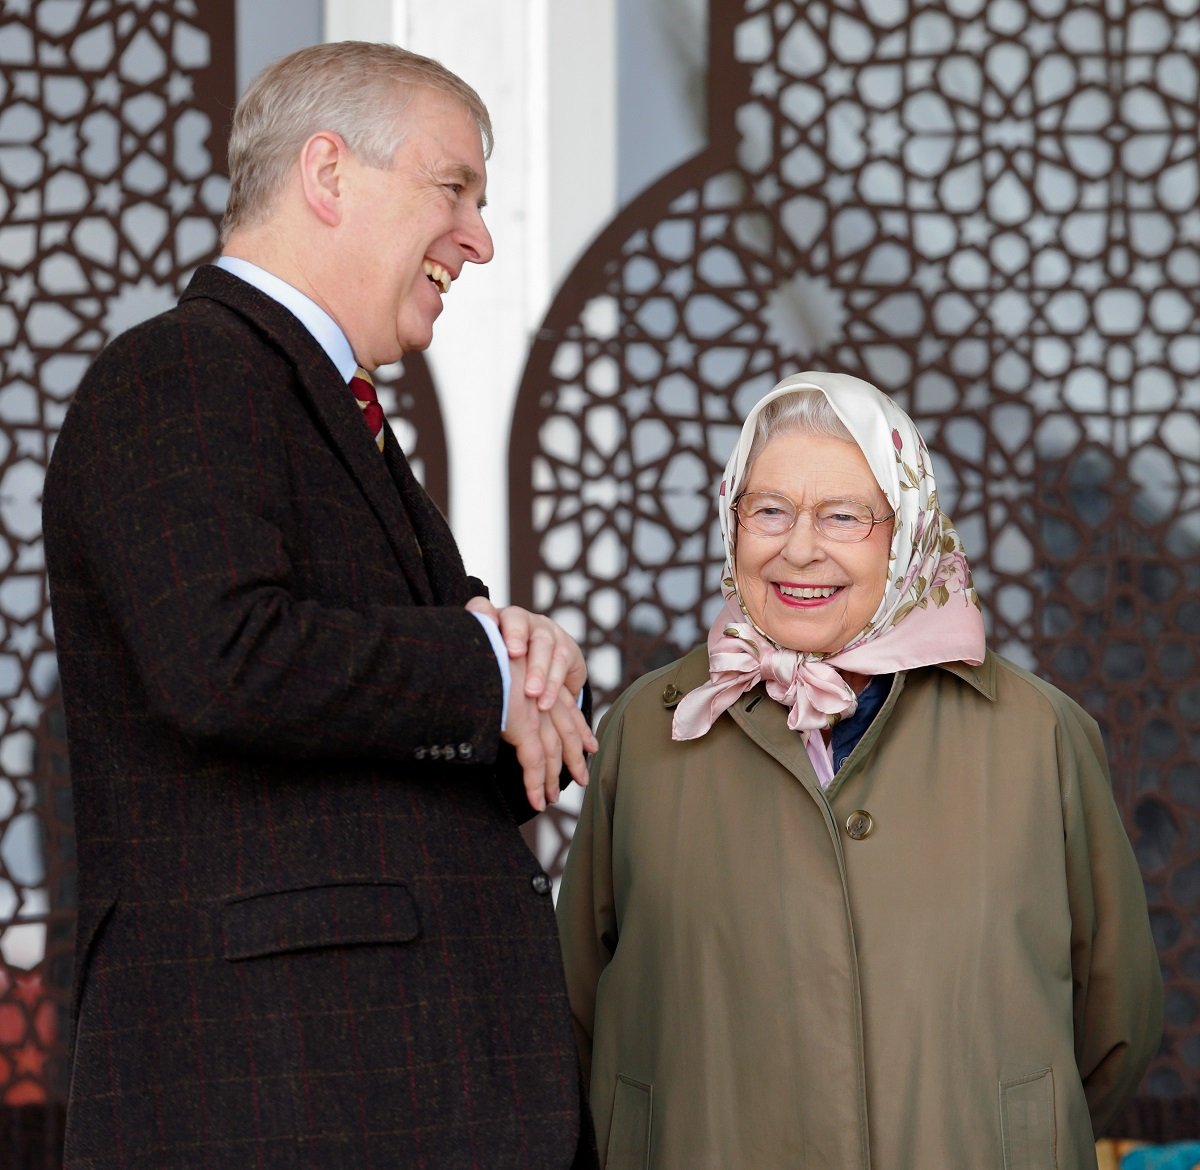 Prince Andrew and Queen Elizabeth II sharing a laugh at the Royal Windsor Horse Show